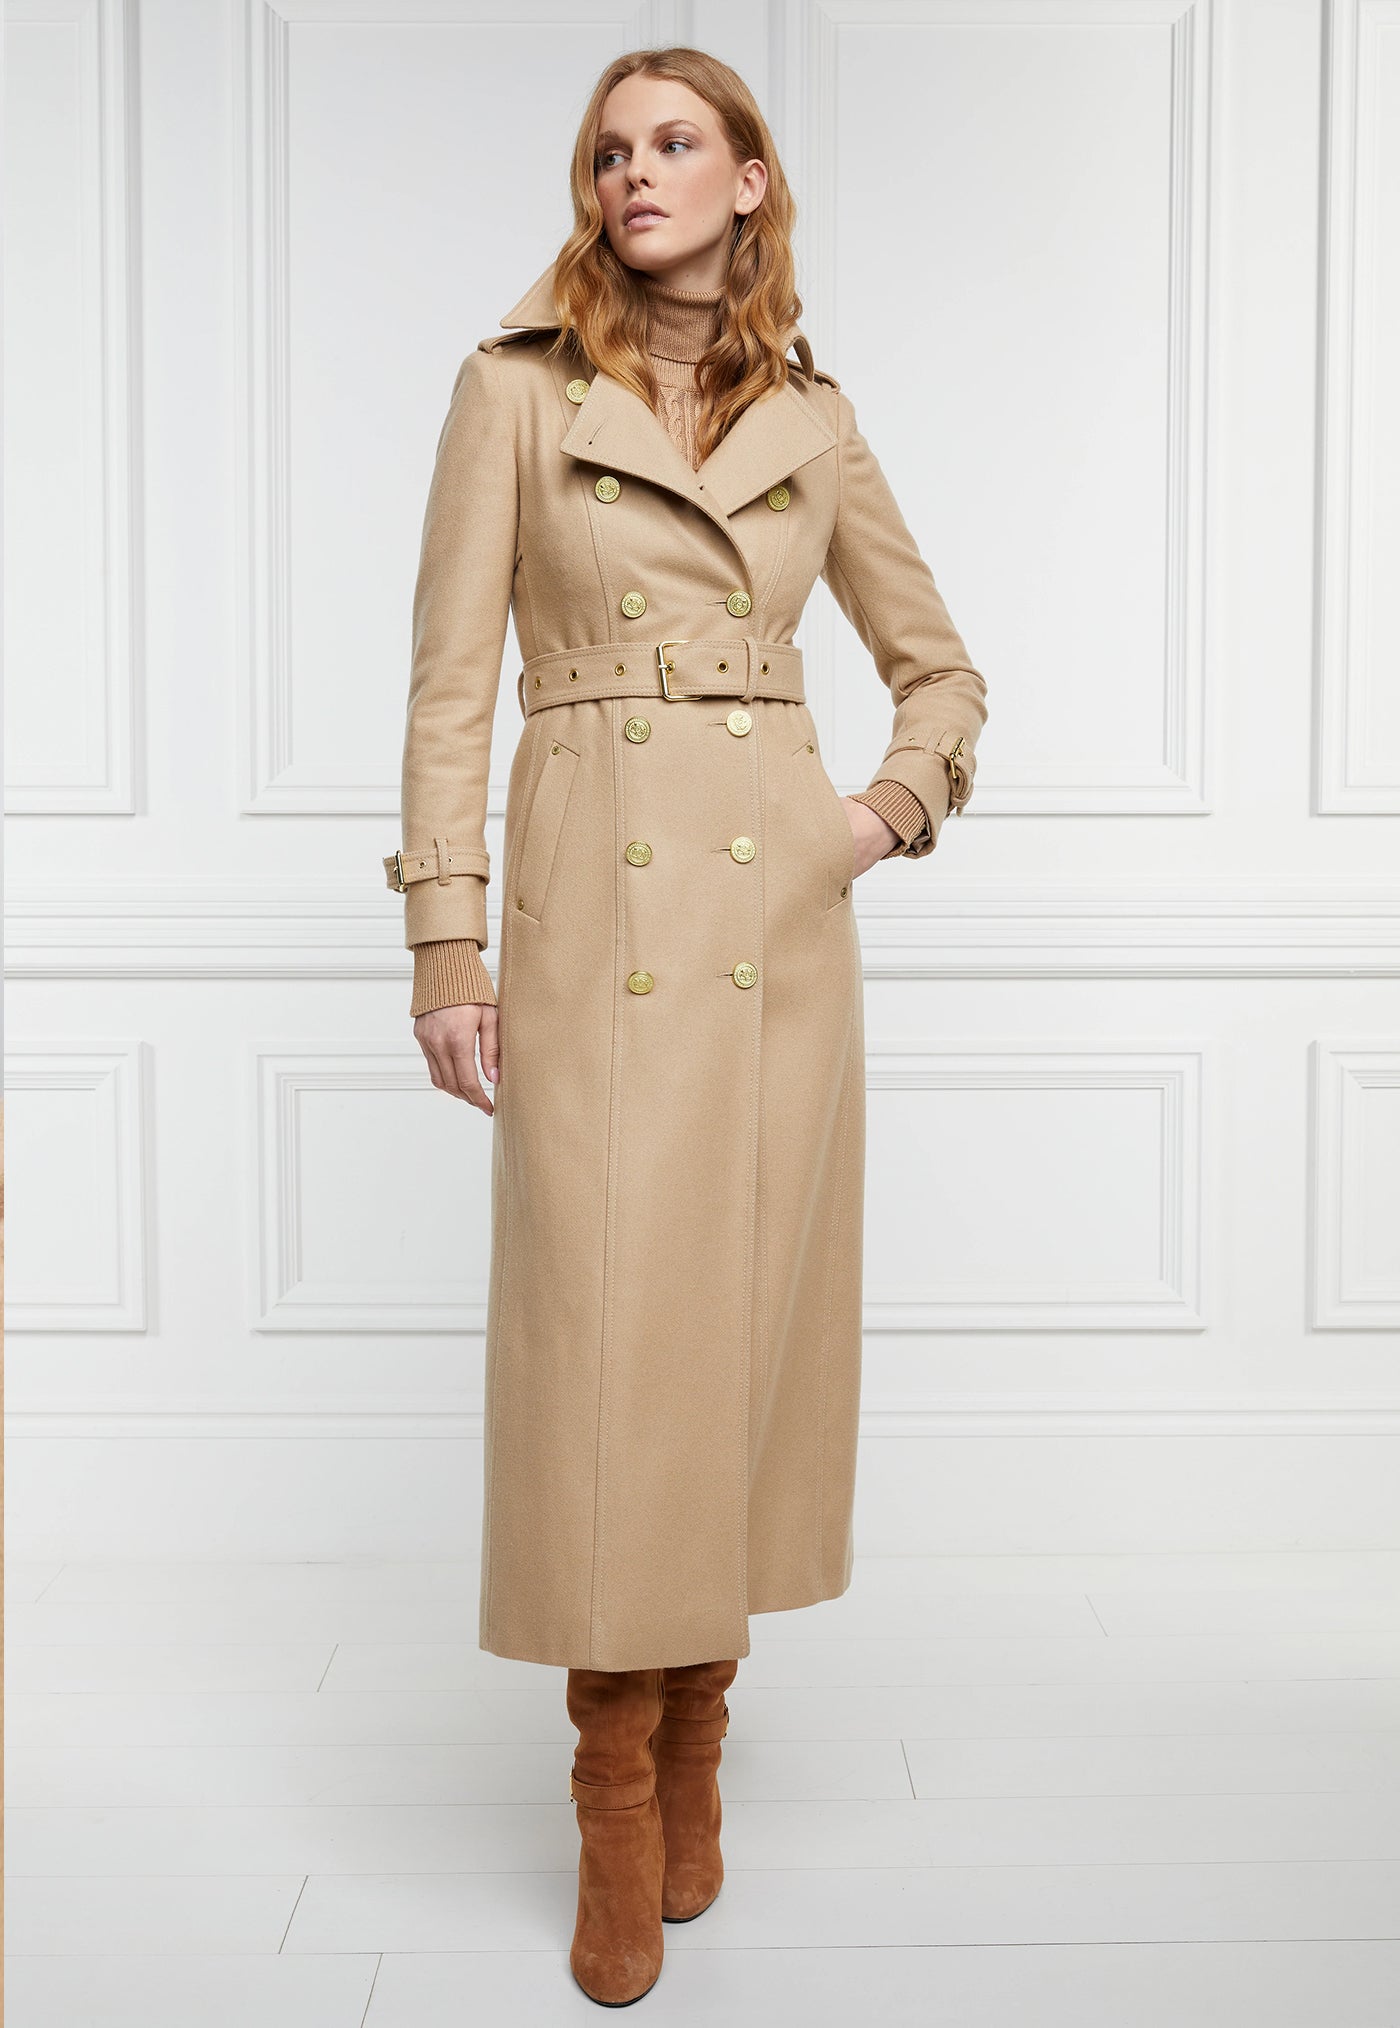 Marlborough Trench Coat Full Length - Camel sold by Angel Divine